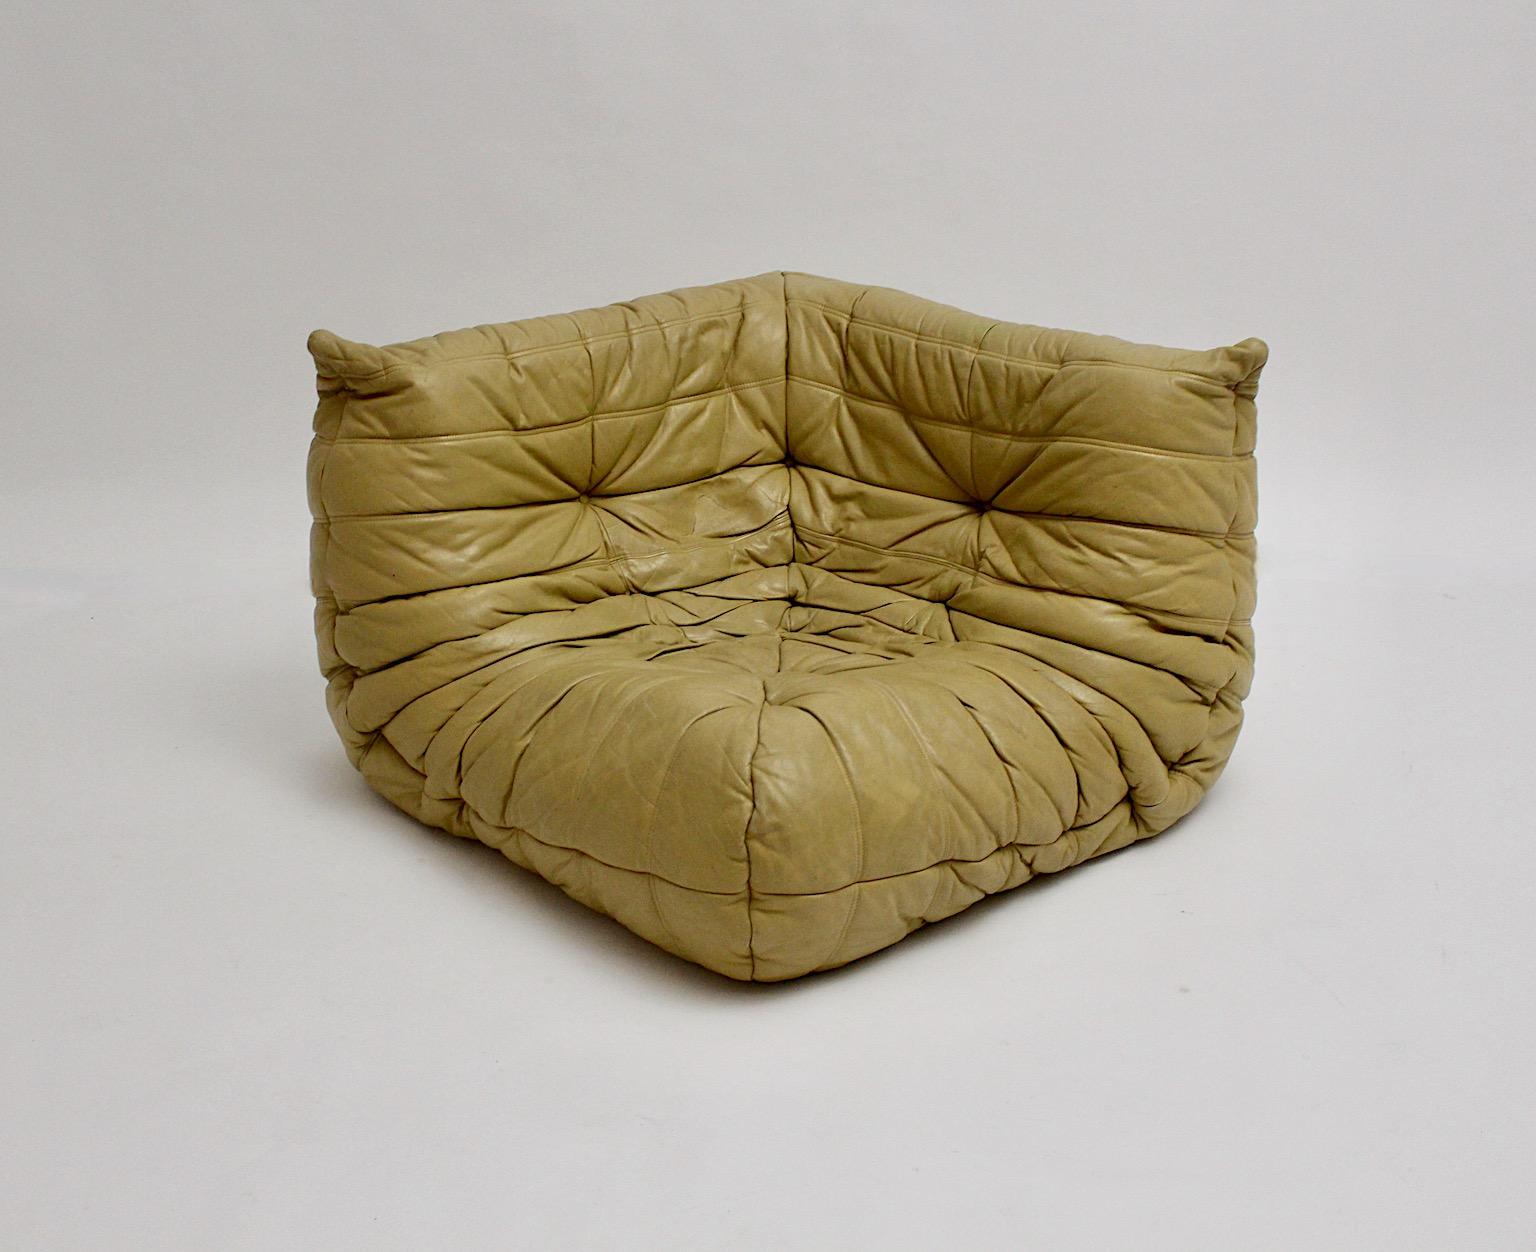 Original Togo vintage corner sofa or club chair from beige leather designed by Michel Ducaroy 1970s France
for Ligne Roset.
The corner sofa shows a light caramel beige color tone and its famous wrinkled cozy design.
Labeled at the back and lined